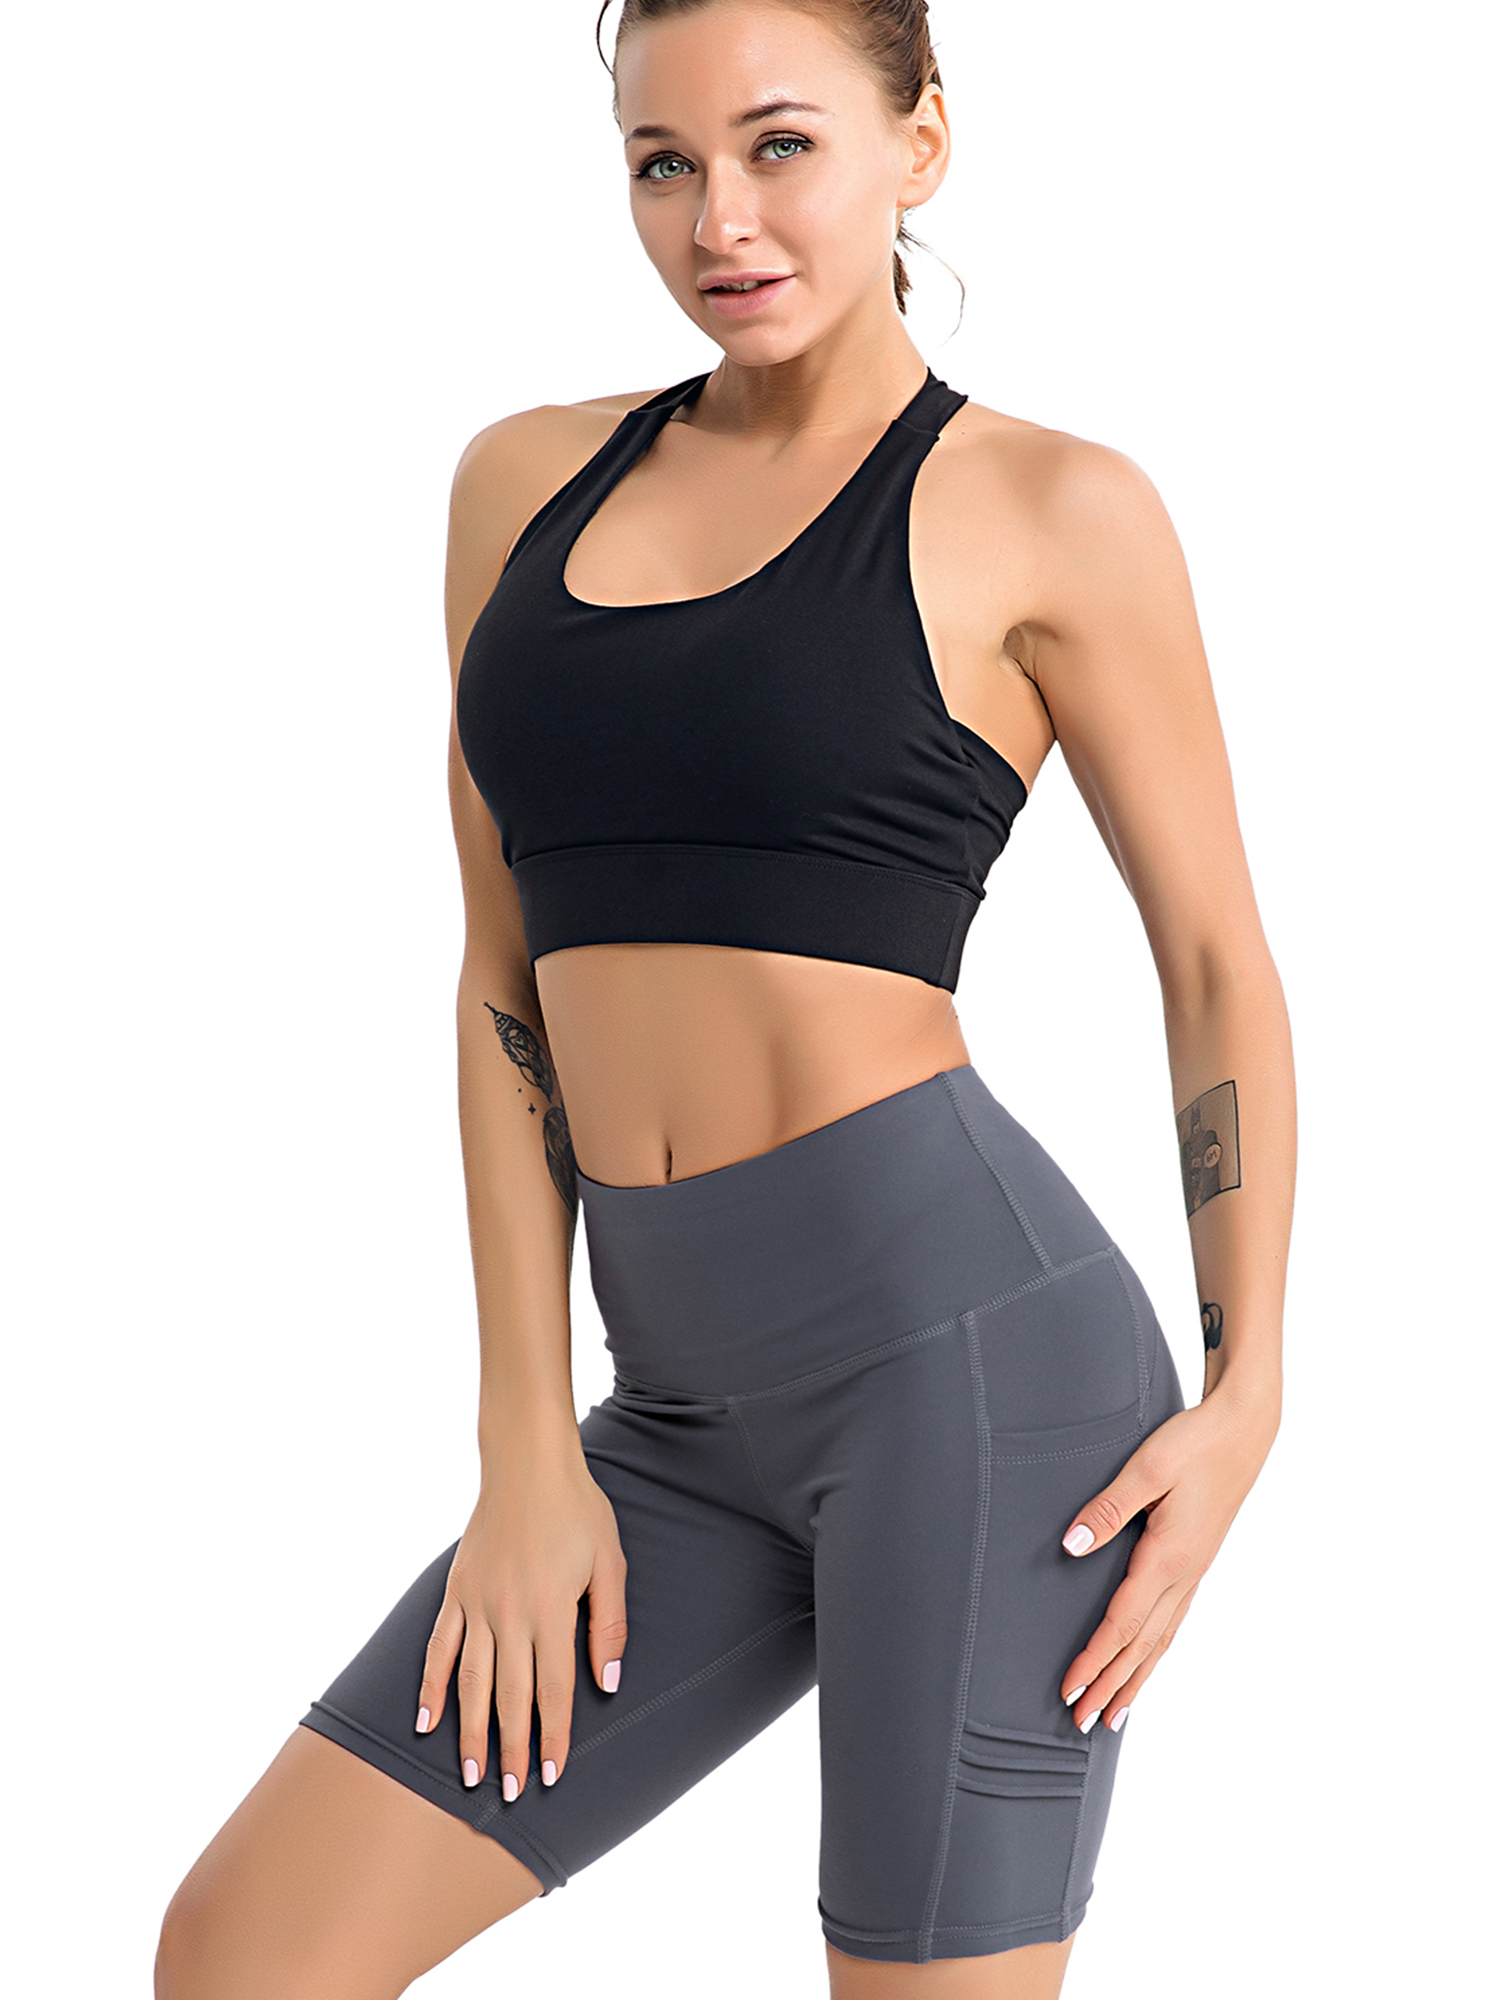 High Waist Tummy Control Workout Yoga Shorts Side Pockets for Women Compression Running Sports Workout Gym Athletic Wear - image 3 of 6